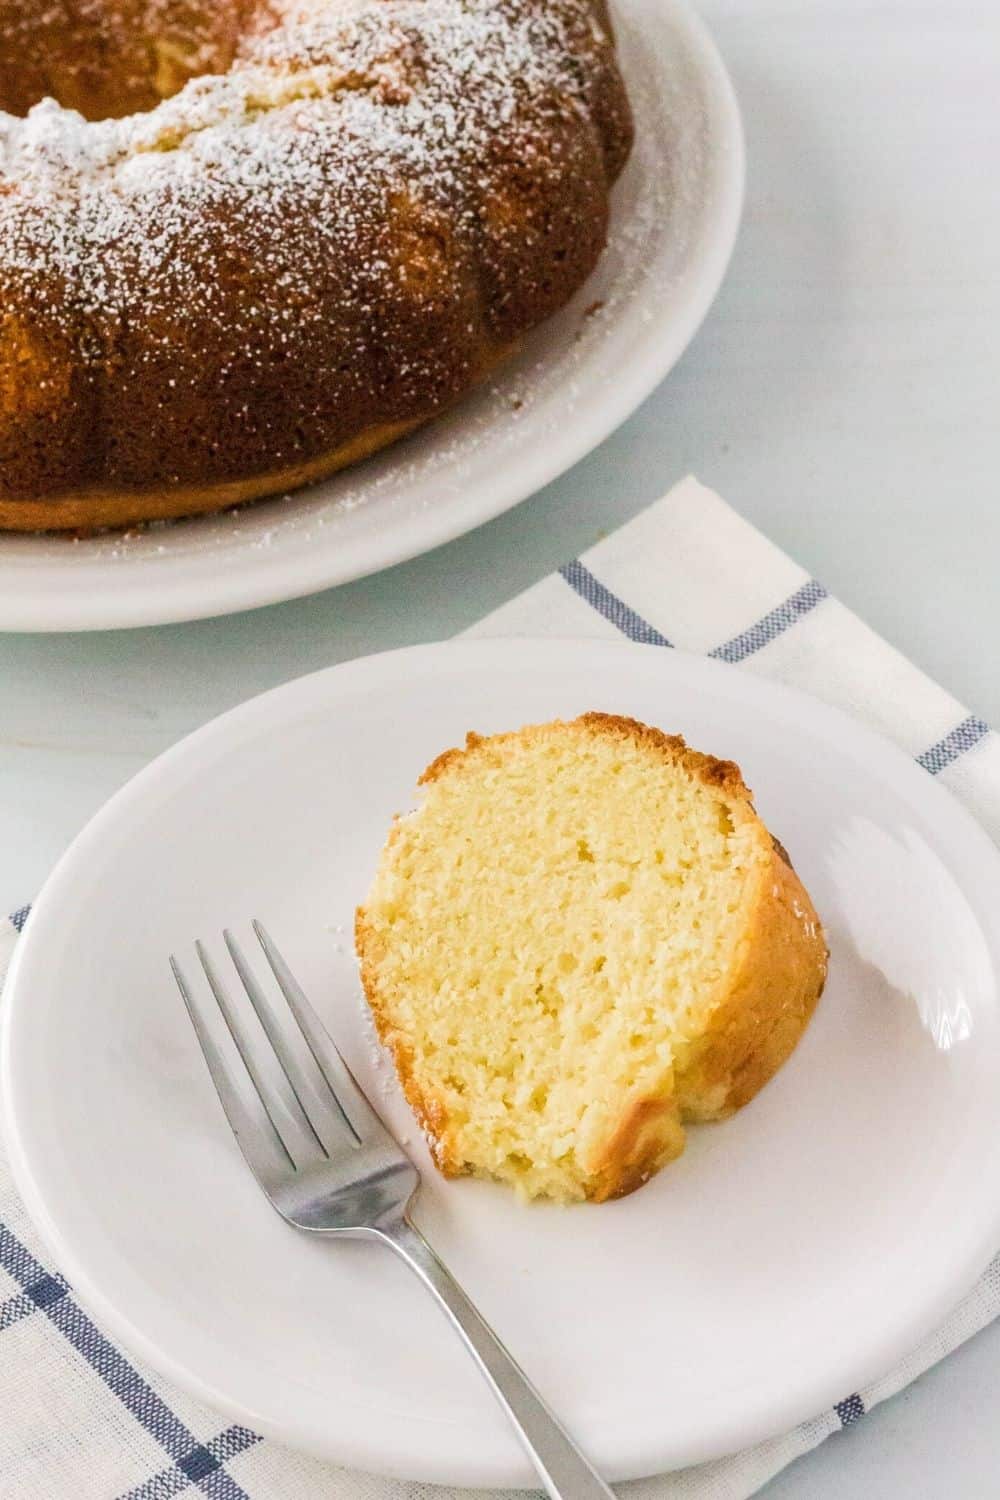 a slice of vanilla mayonnaise cake on a white plate, with the remaining bundt cake in the background